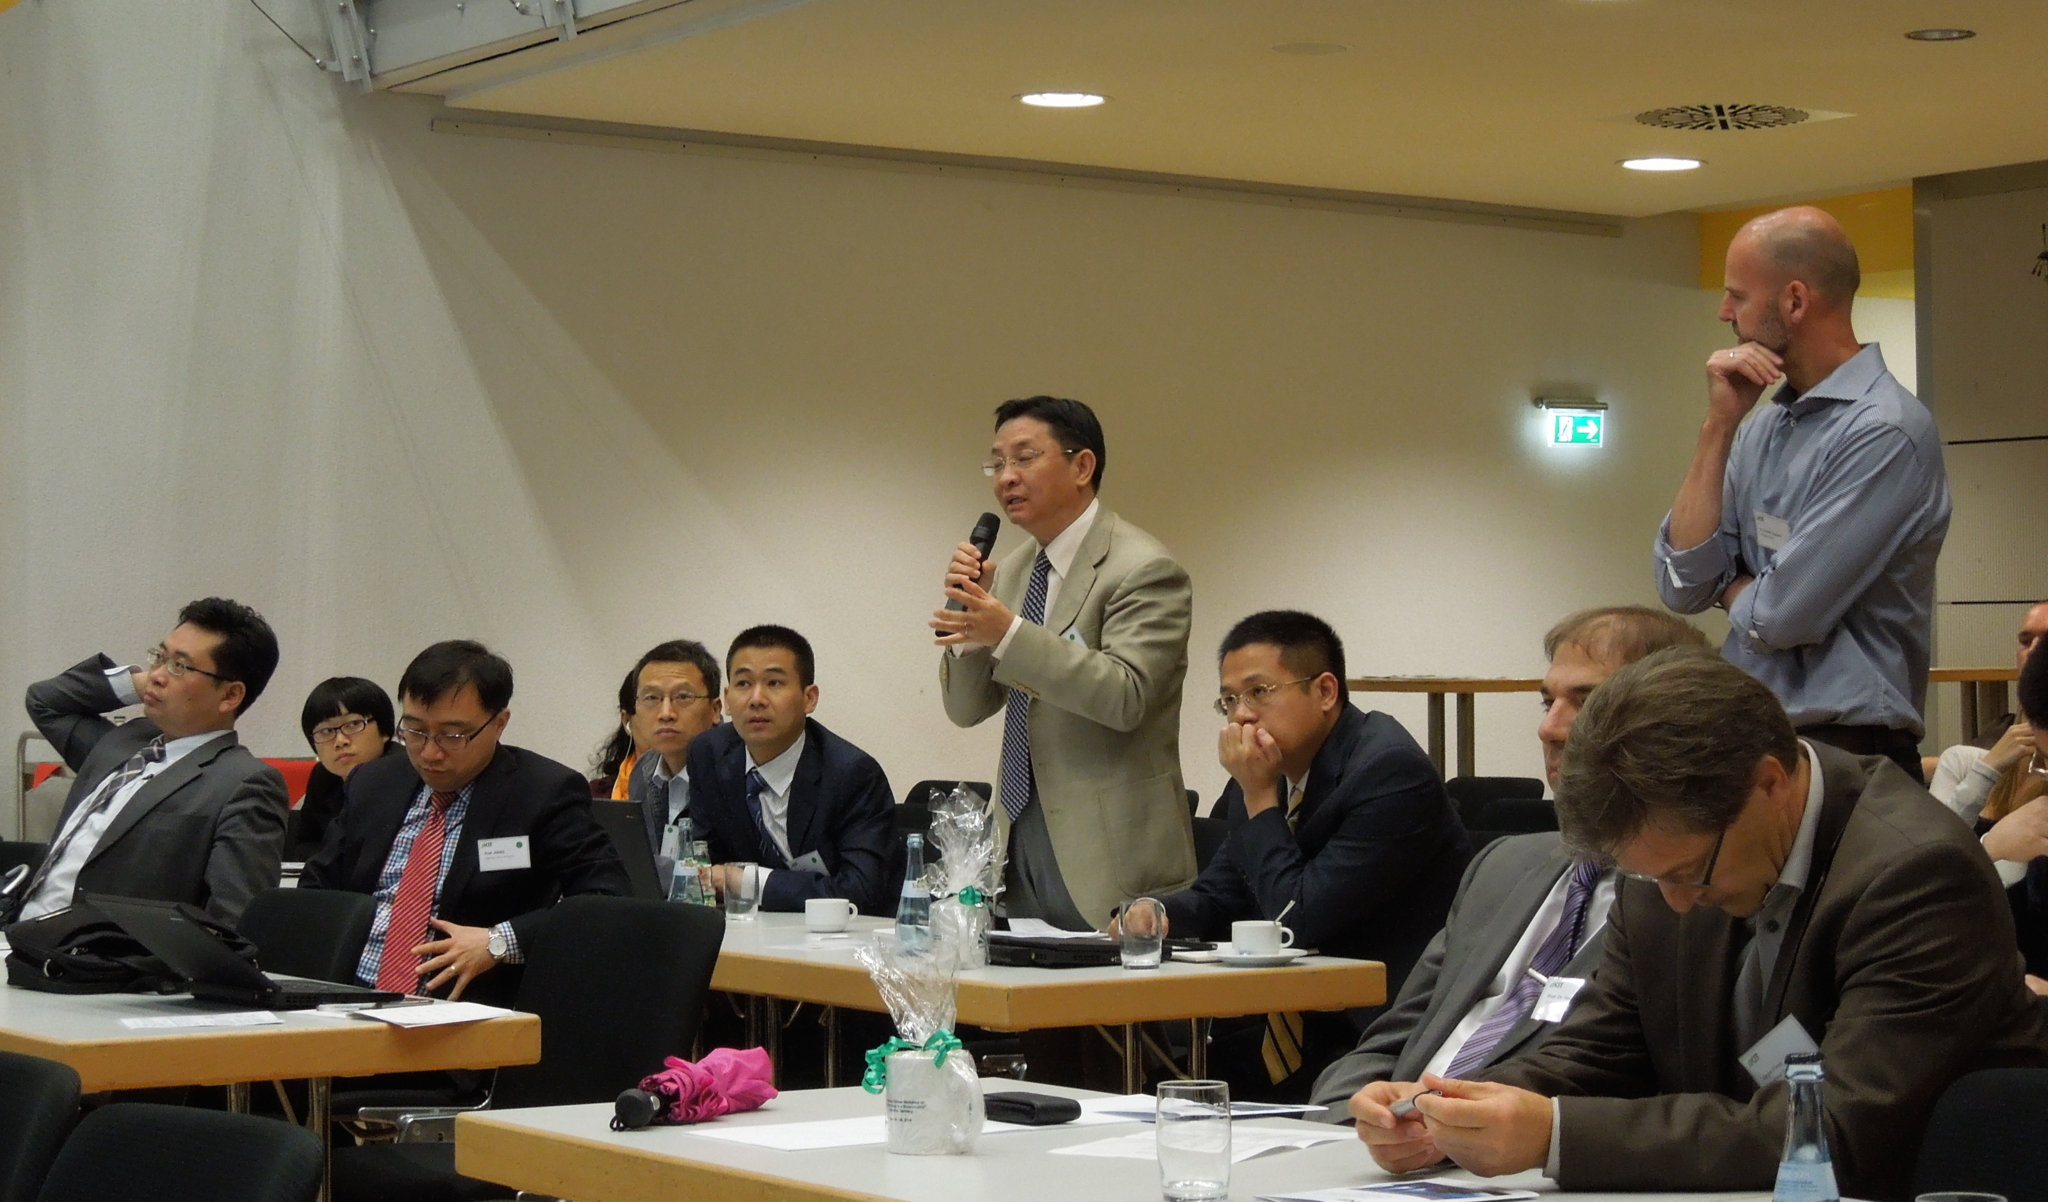 The photo shows Chinese and German workshop participants engaged in a lively discussion.